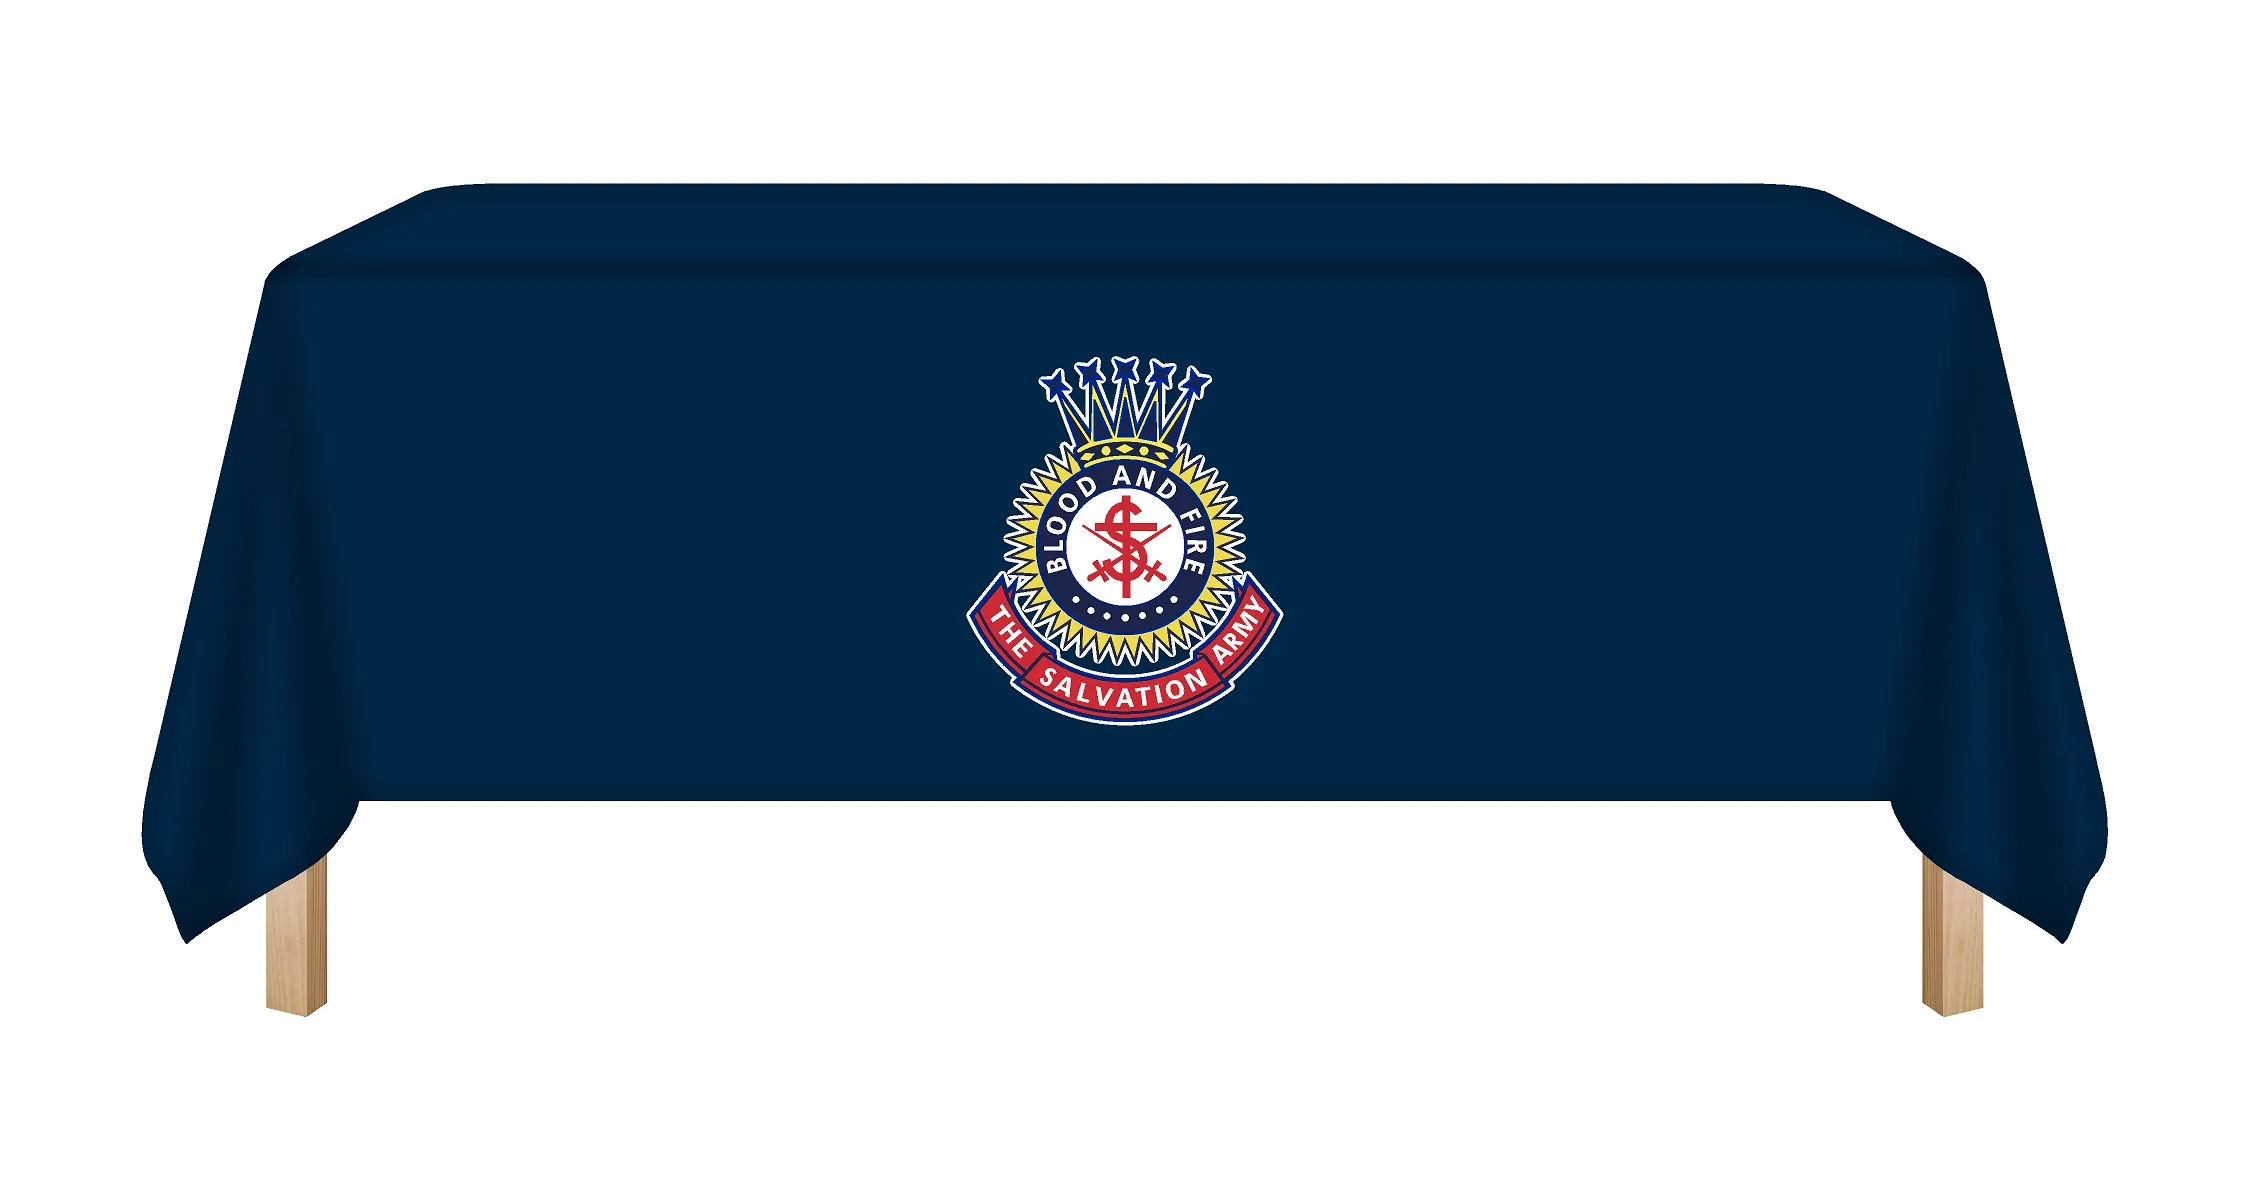 Blue table cloth with Salvation Army Crest logo